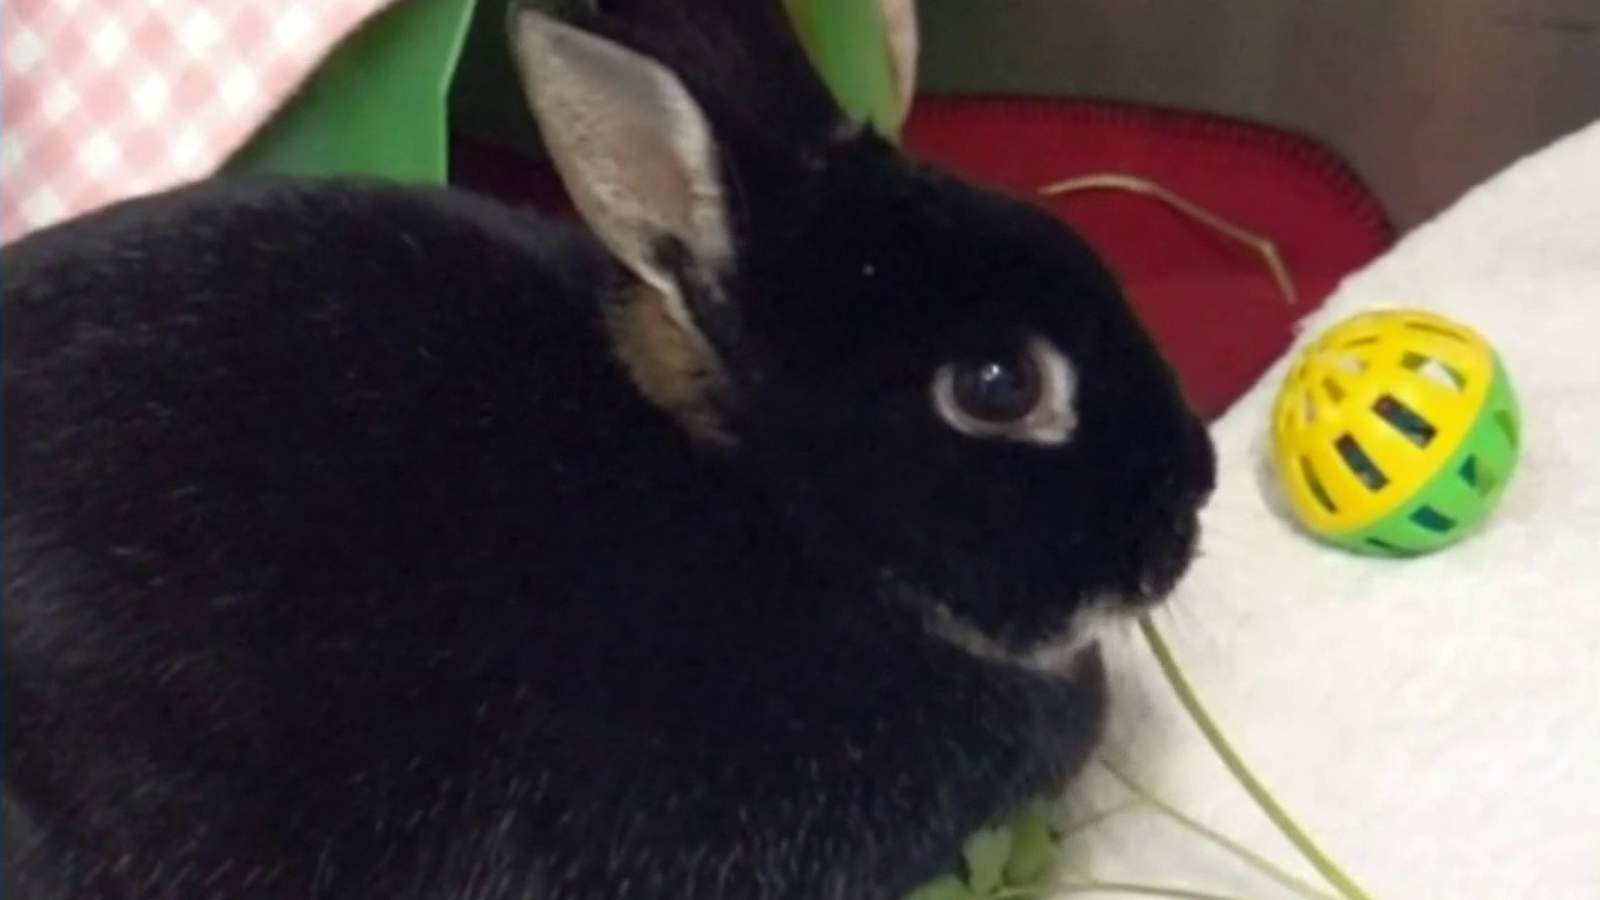 Looking for a pet? This bunny is ‘hop’ing for a home